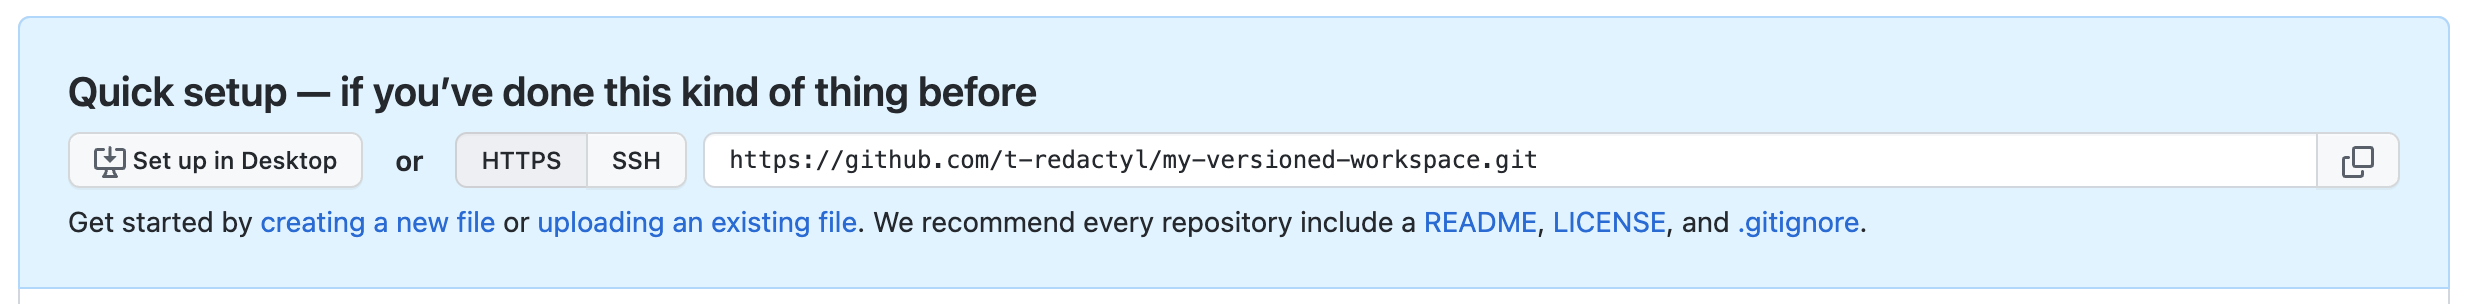 Screenshot of path to remote repository on Github.